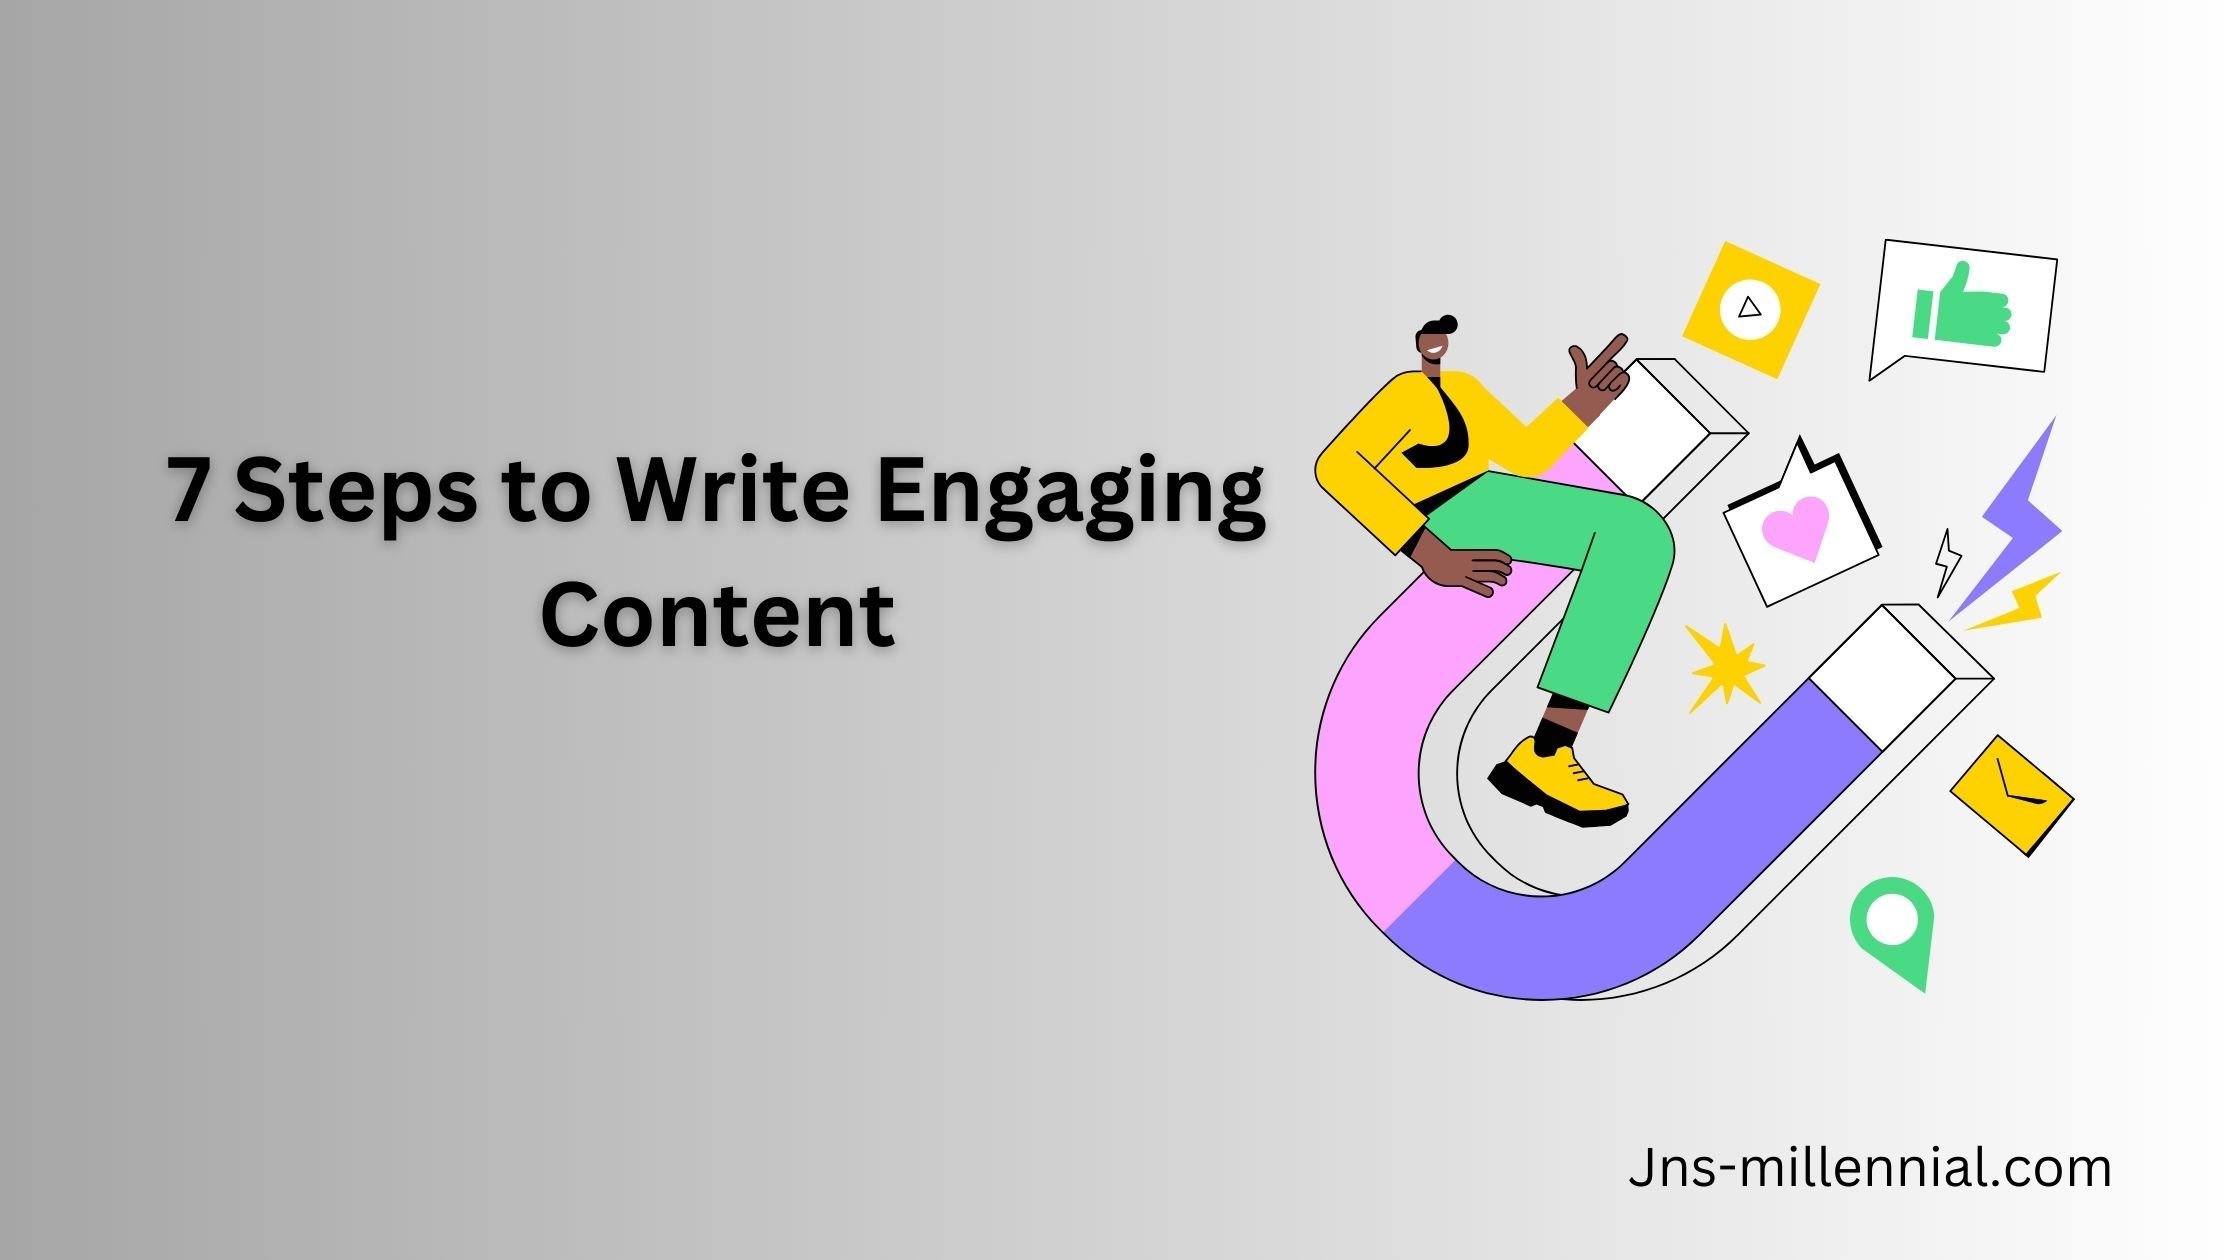 7 Steps to Write Engaging Content